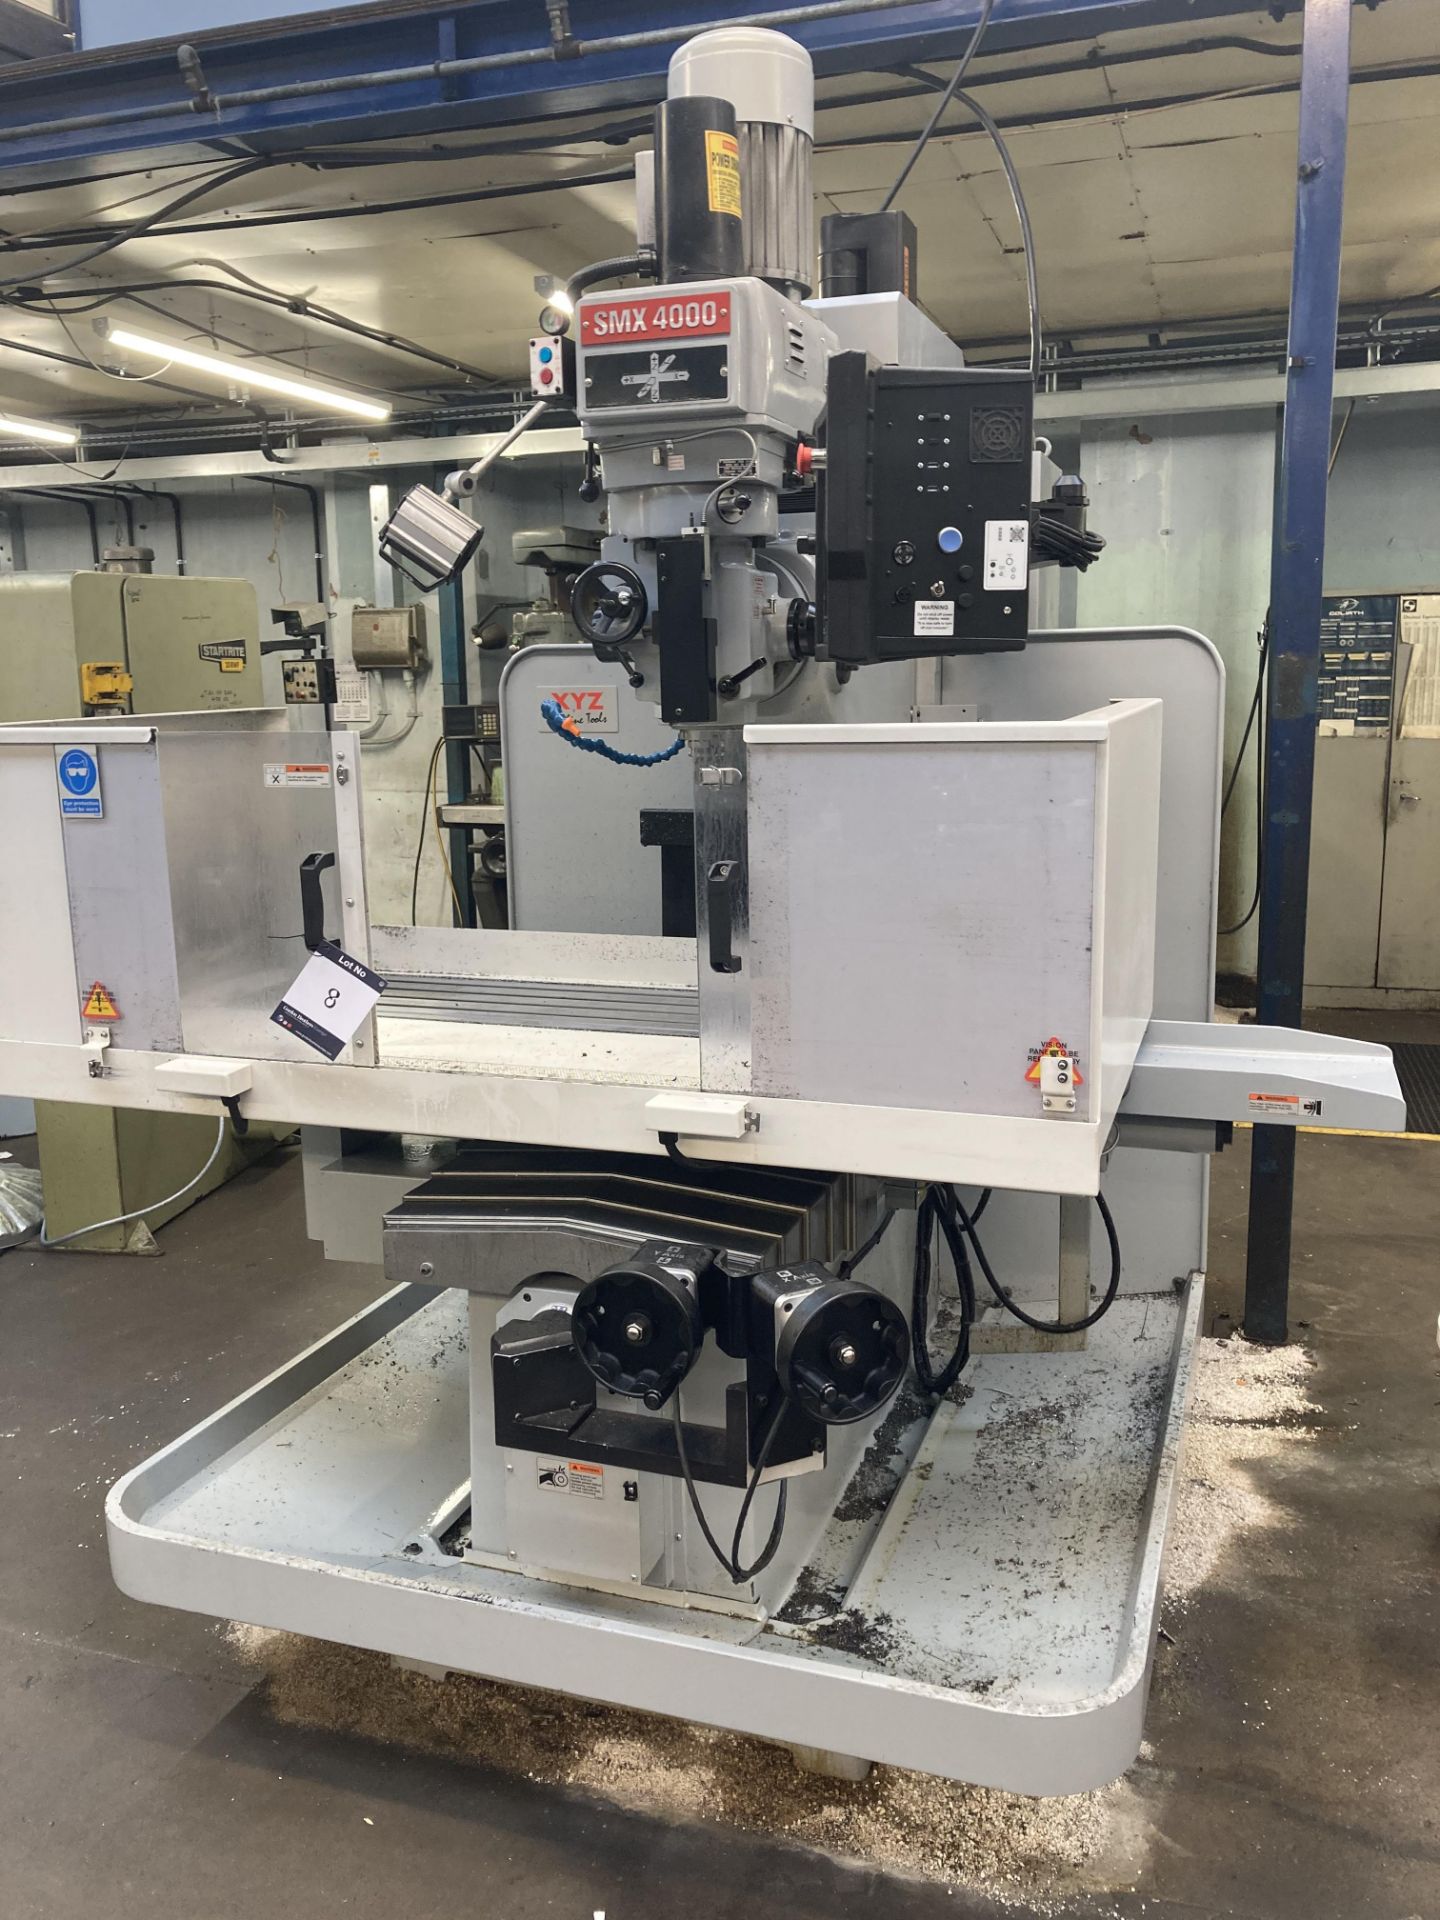 XYZ SMX 4000 CNC 3 axis vertical bed milling machine, Serial No. 13119 (2019), table size 1474mm x